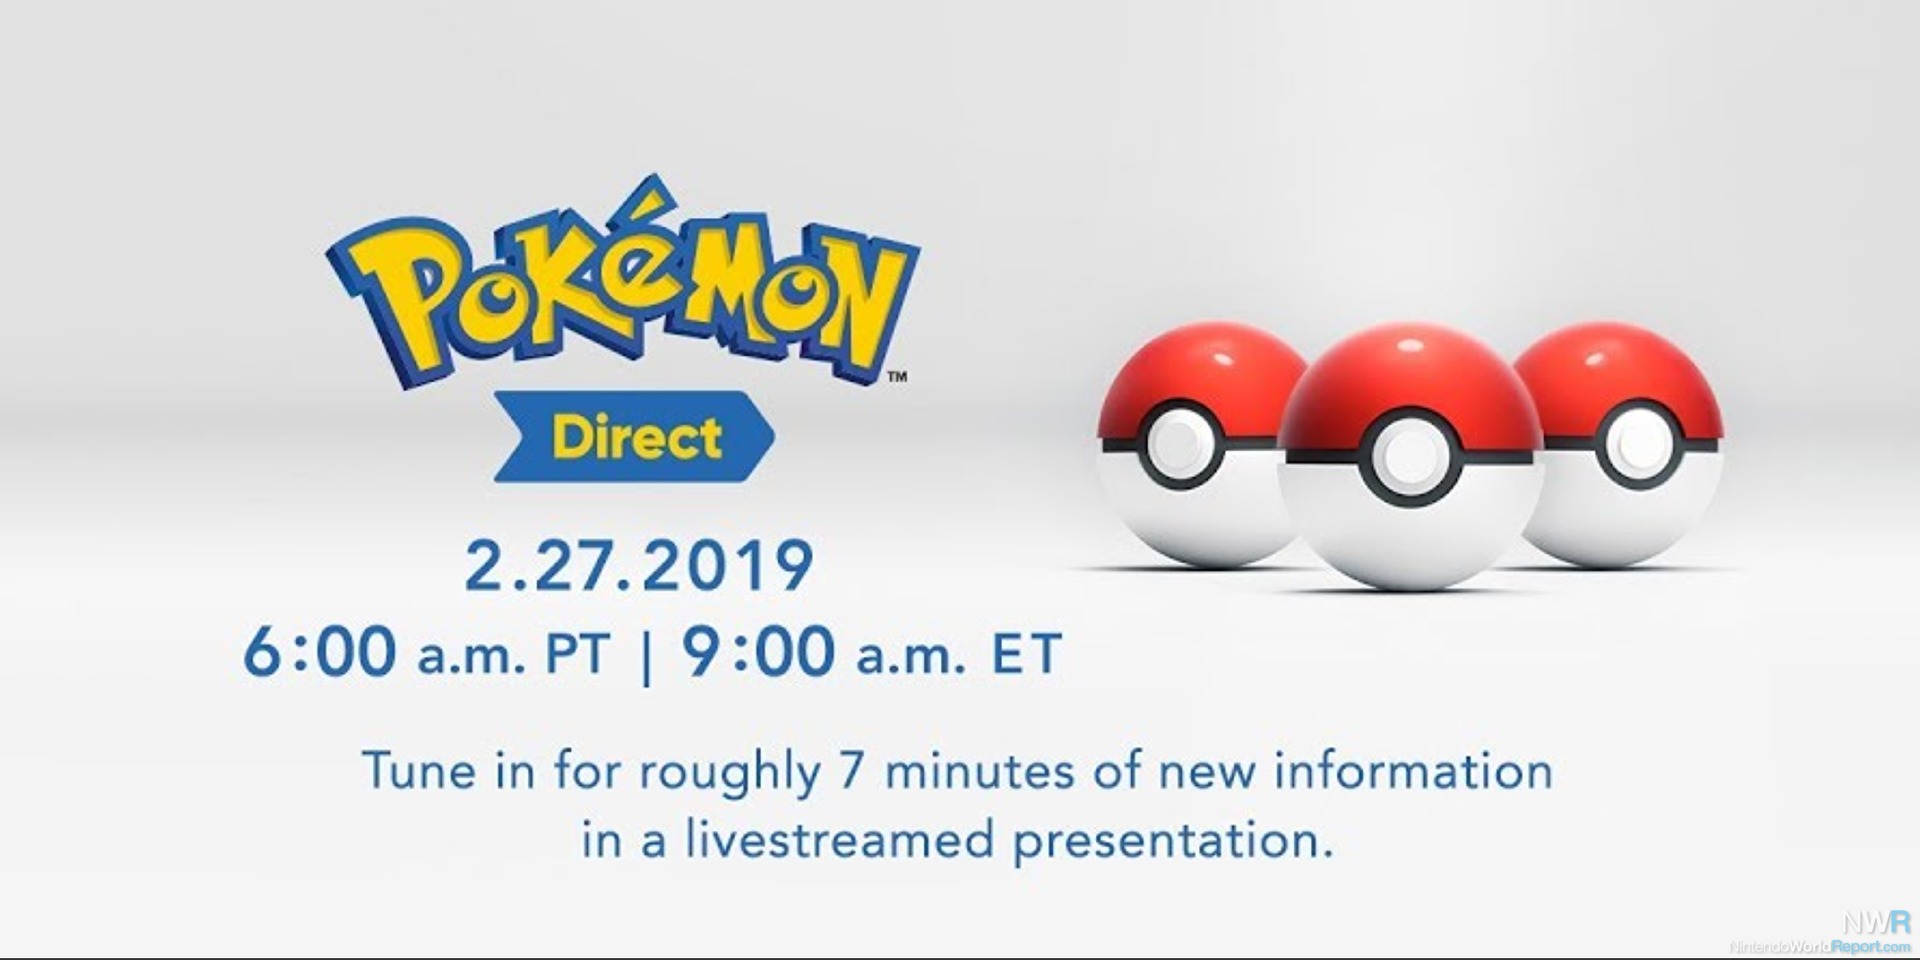 There's going to be a Pokemon-centric Nintendo Direct tomorrow